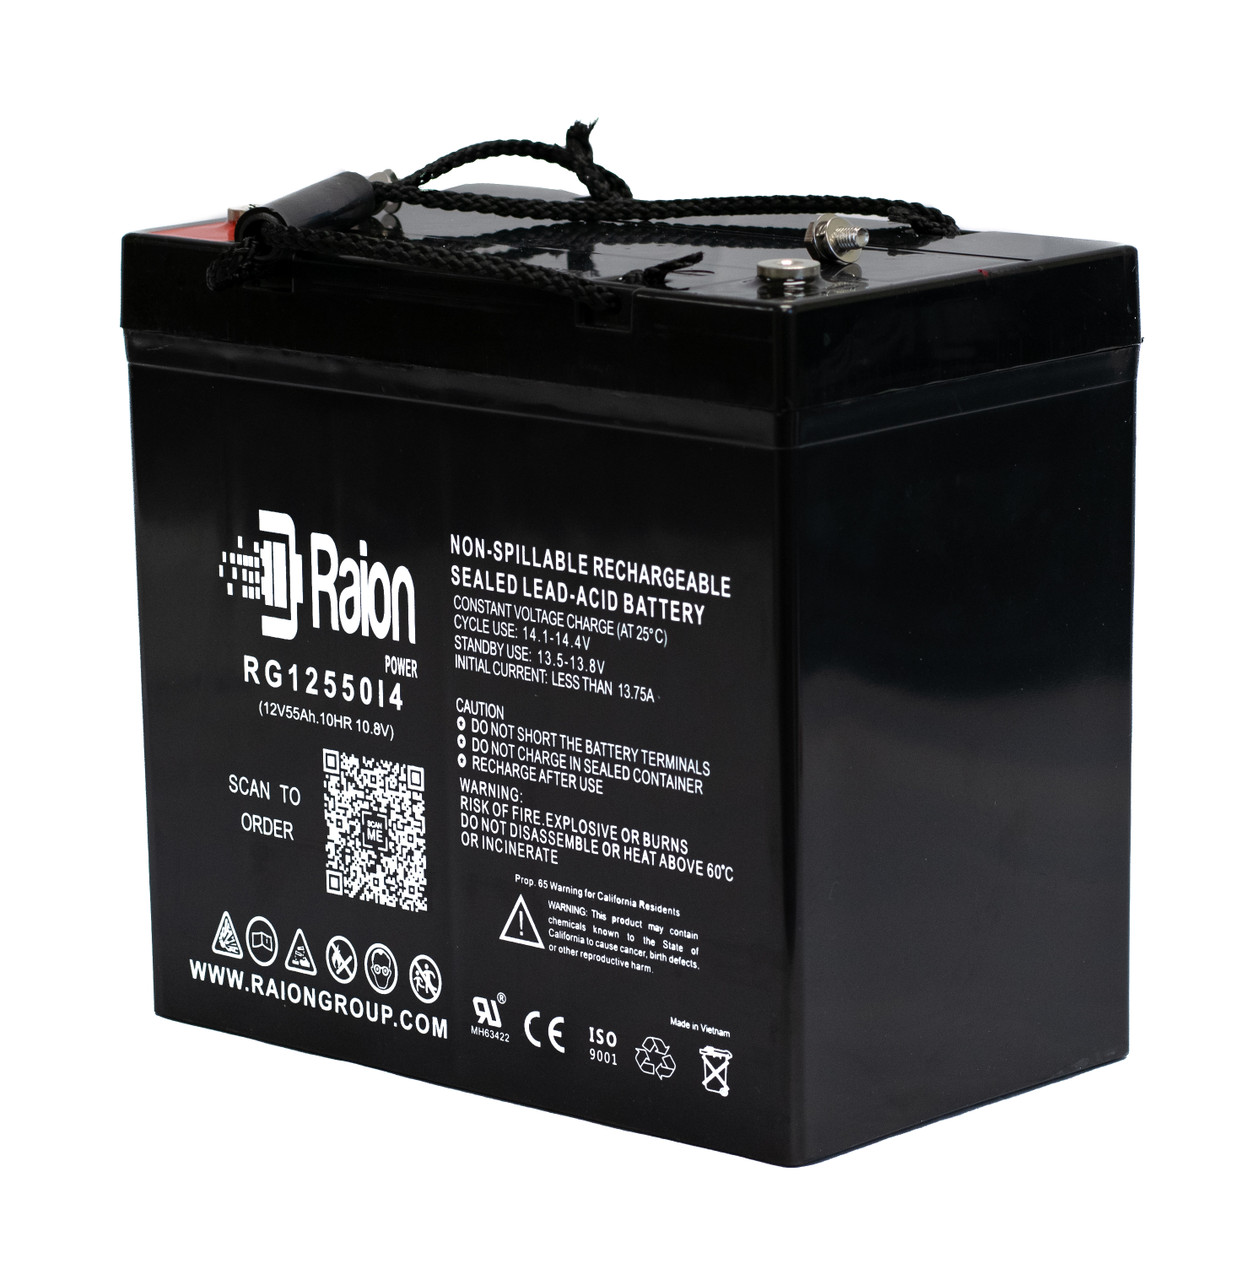 Raion Power Replacement 12V 55Ah Battery for Oracle DC60-12 - 1 Pack